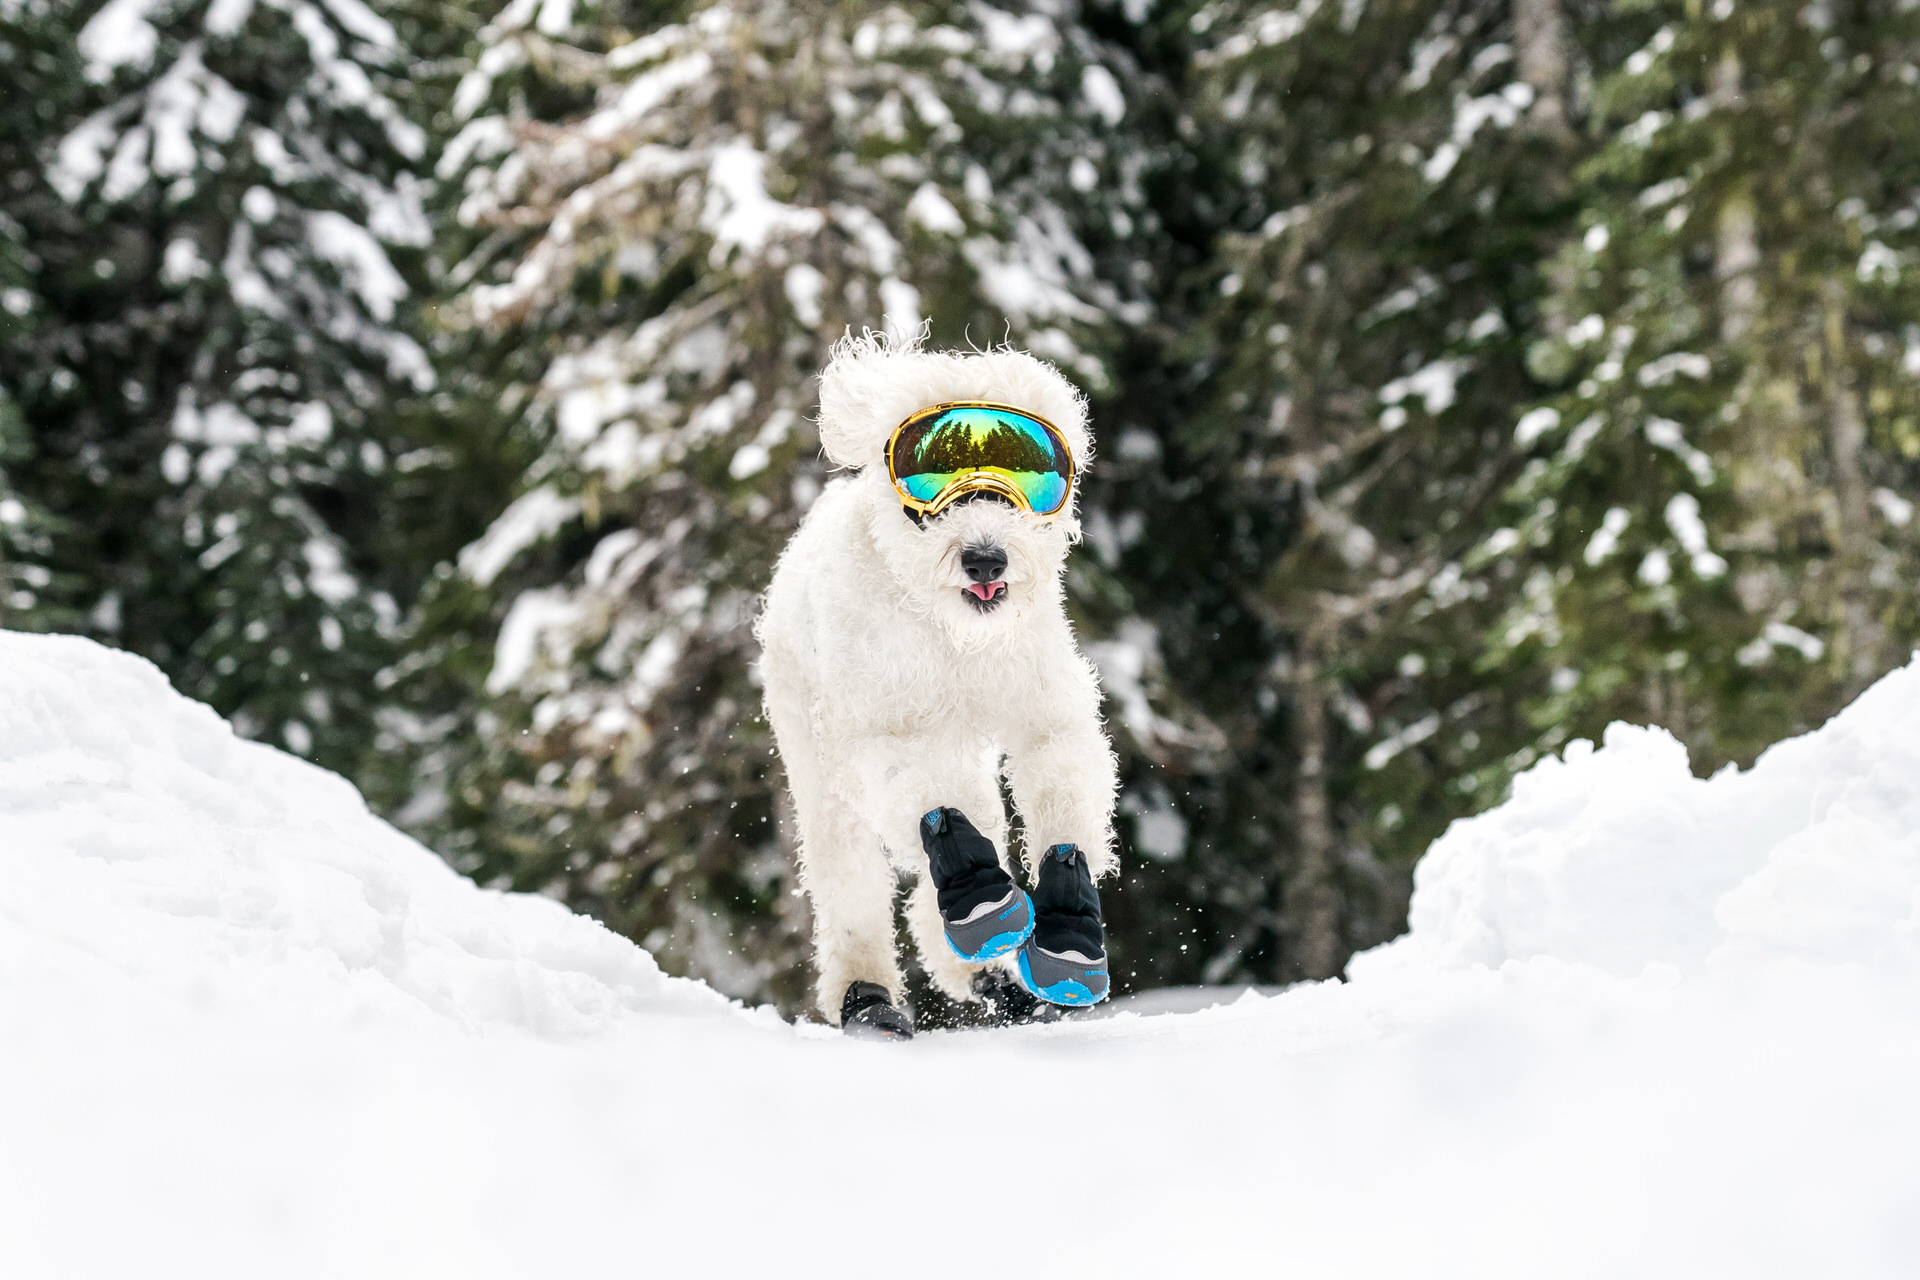 dog runs while wearing colorful goggles in the snow